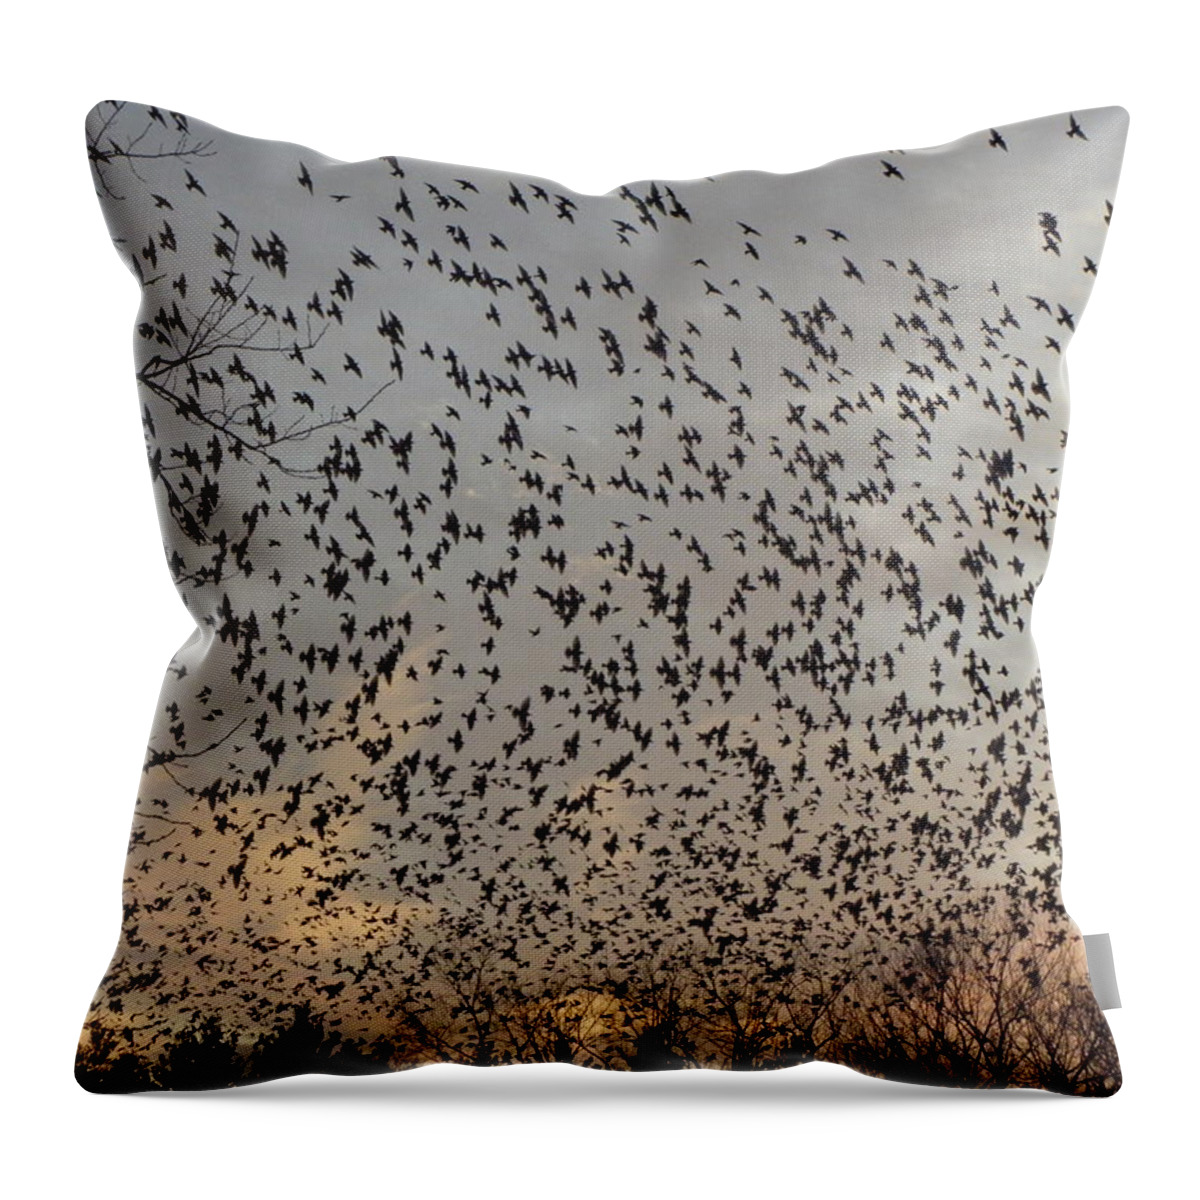 Starlings Throw Pillow featuring the photograph Invasion Of The Birds by Kim Galluzzo Wozniak